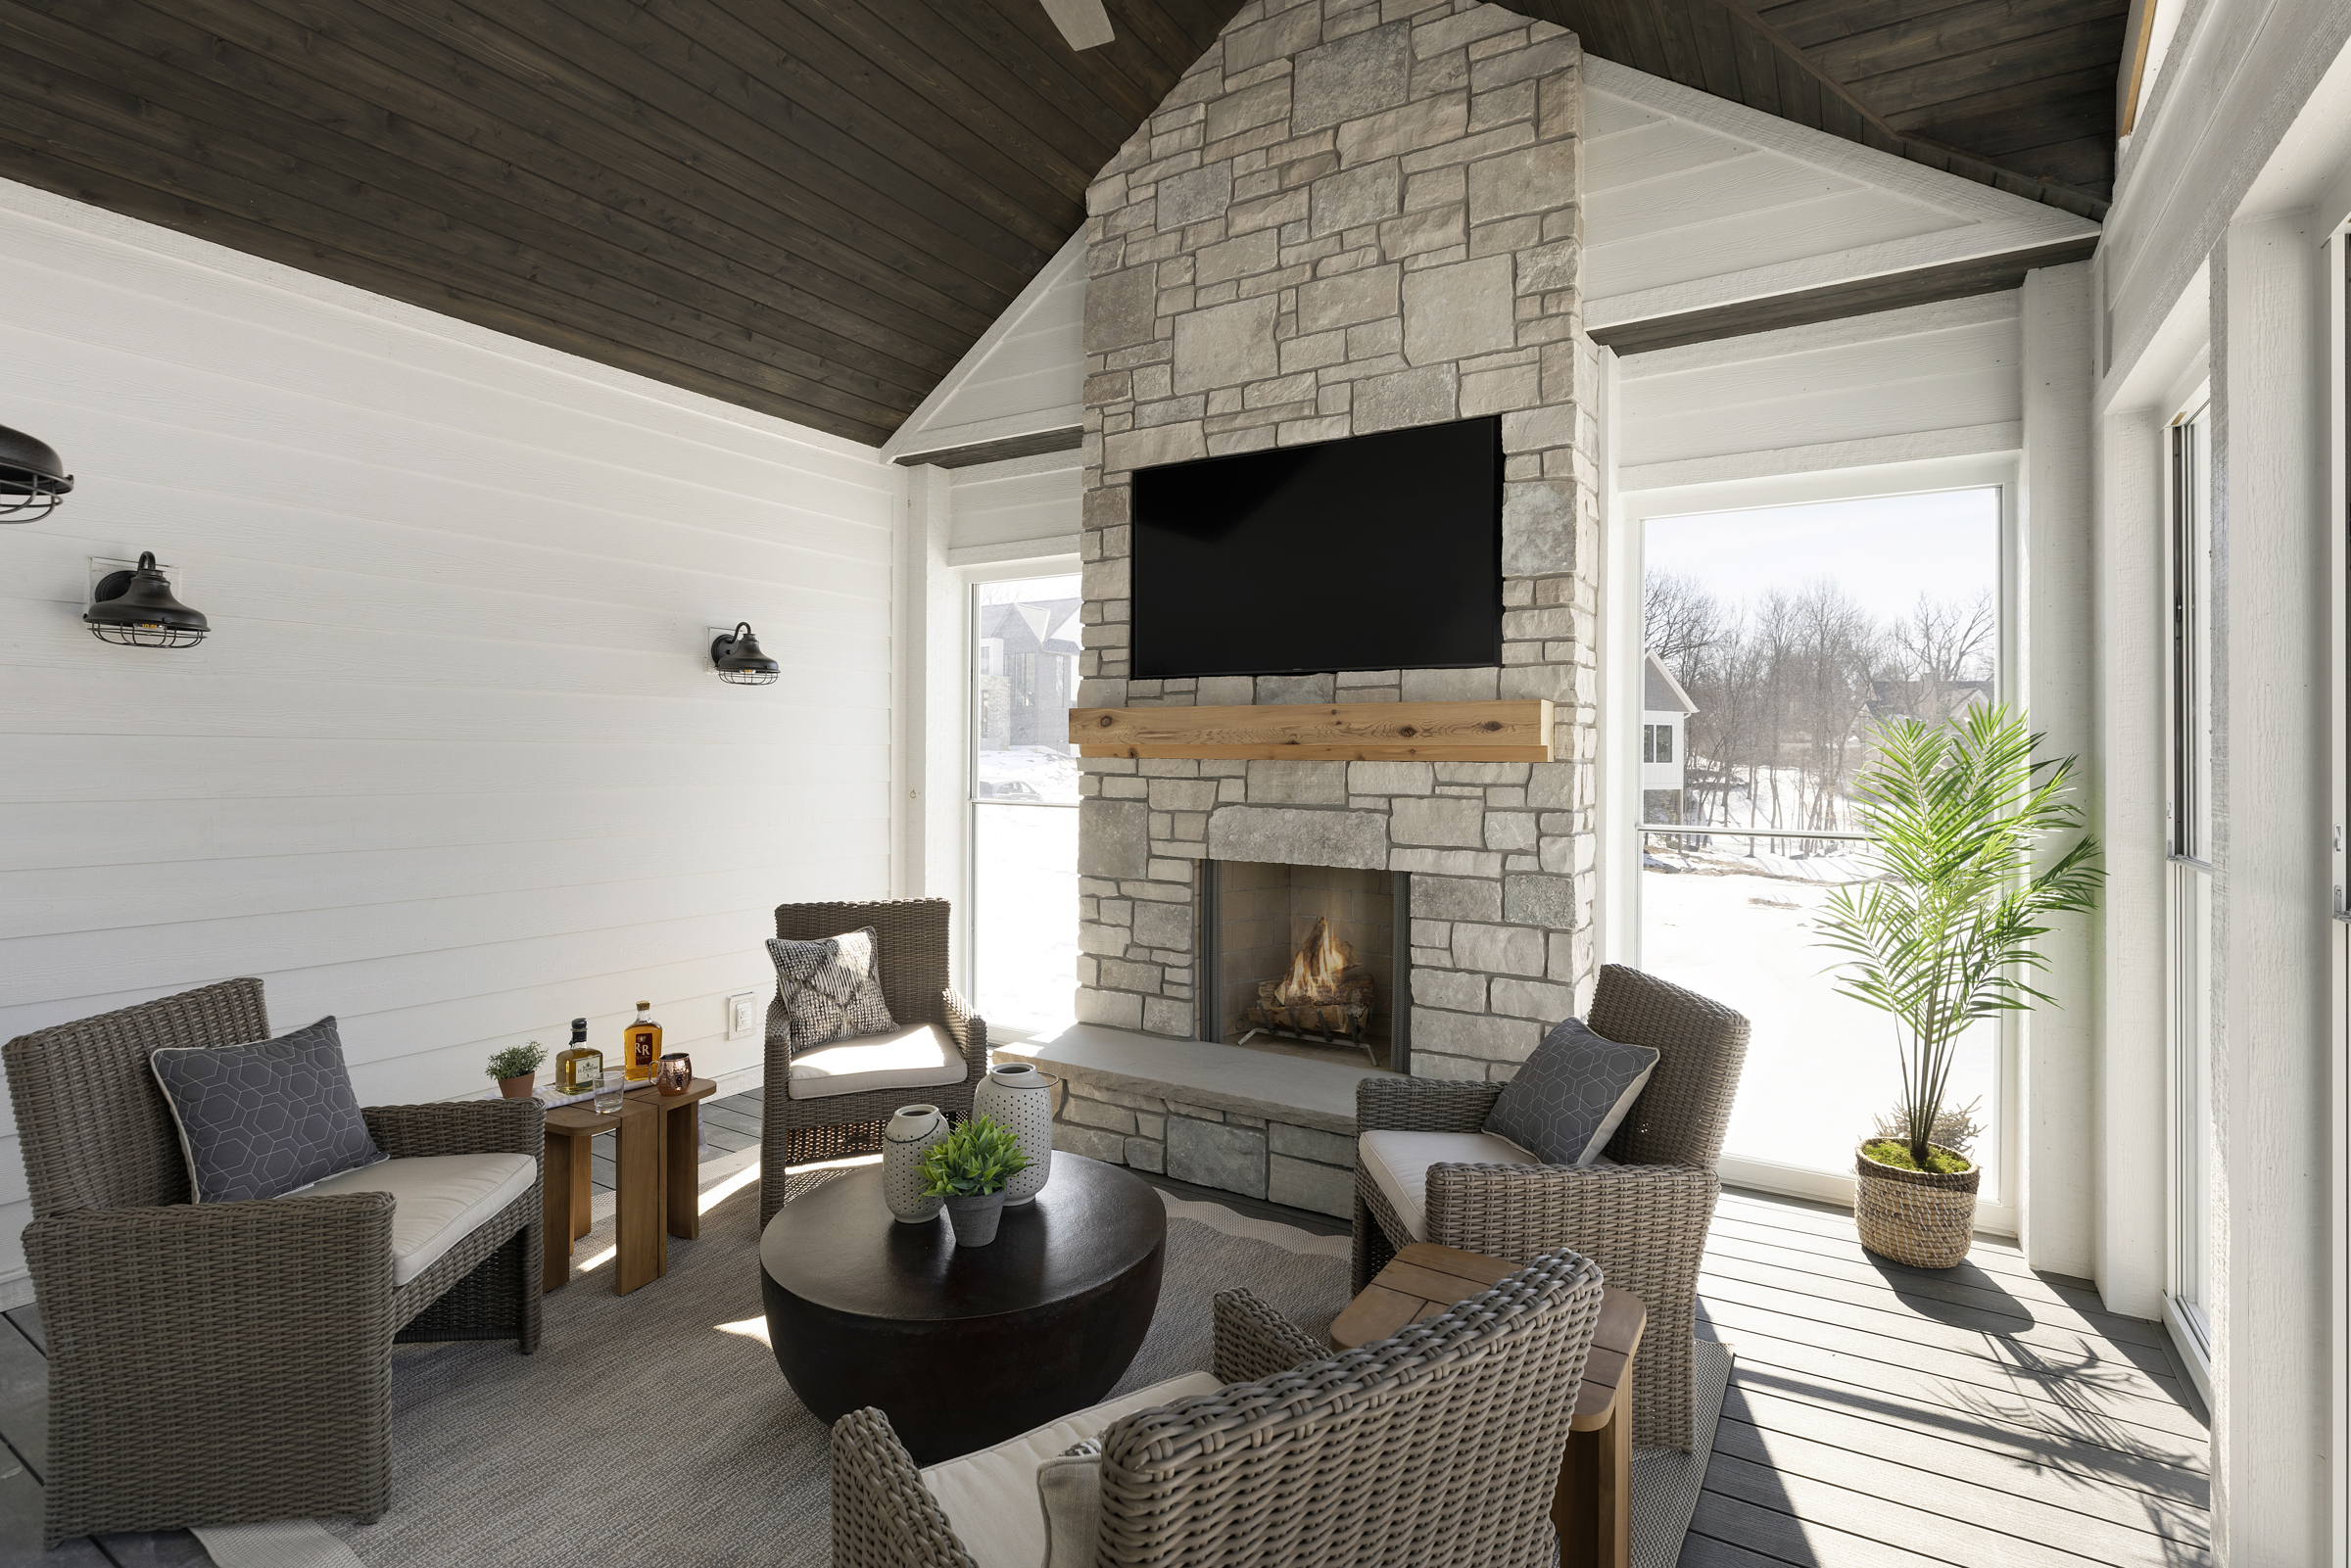 four season porch with arched ceiling detail, stone fireplace surround, floor to ceiling windows, shiplap walls, four patio chairs, and a coffee table